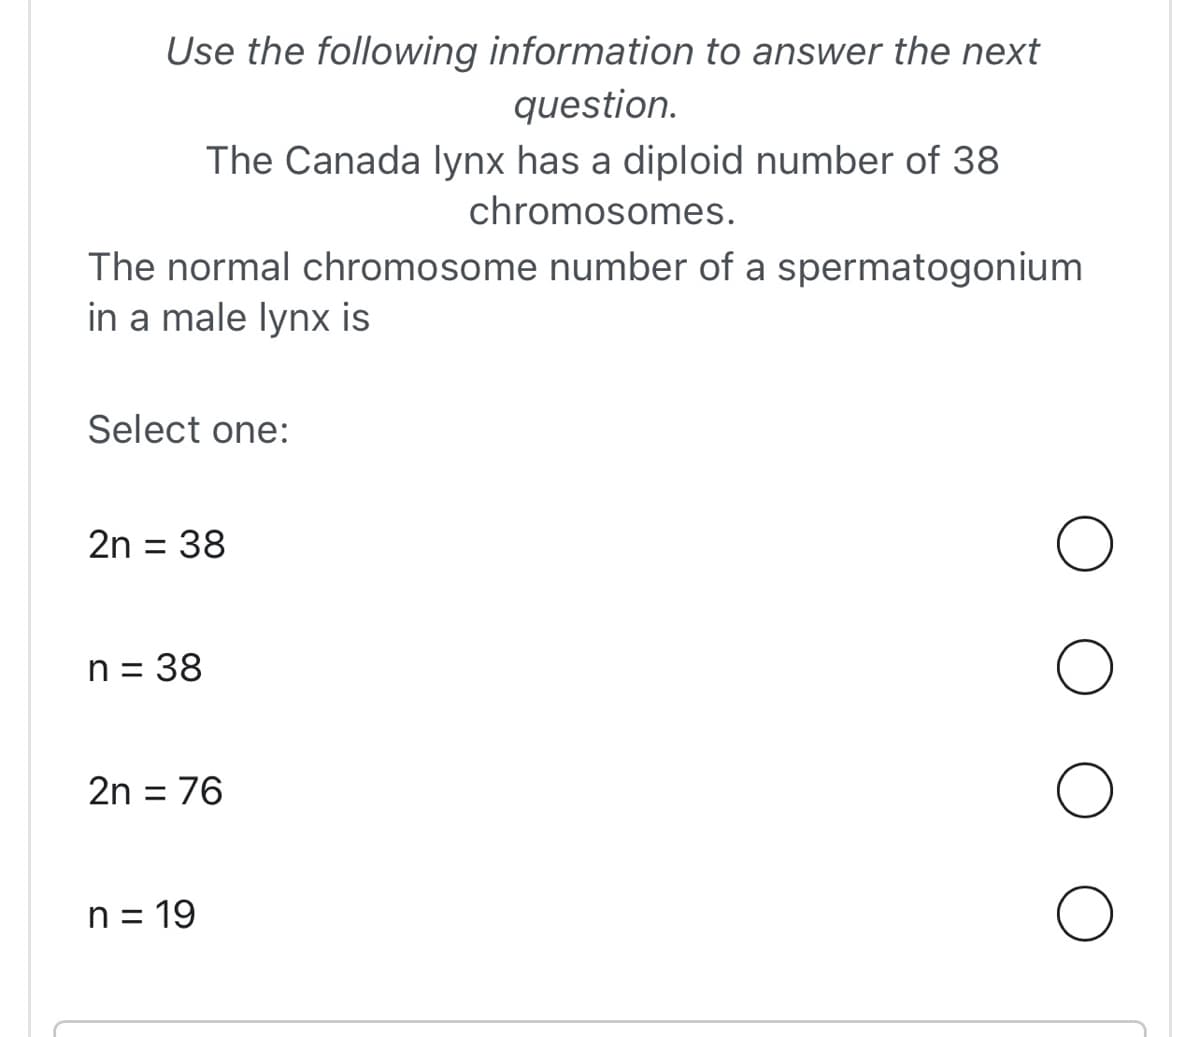 Use the following information to answer the next
question.
The Canada lynx has a diploid number of 38
chromosomes.
The normal chromosome number of a spermatogonium
in a male lynx is
Select one:
2n = 38
n = 38
2n = 76
n = 19
O
O